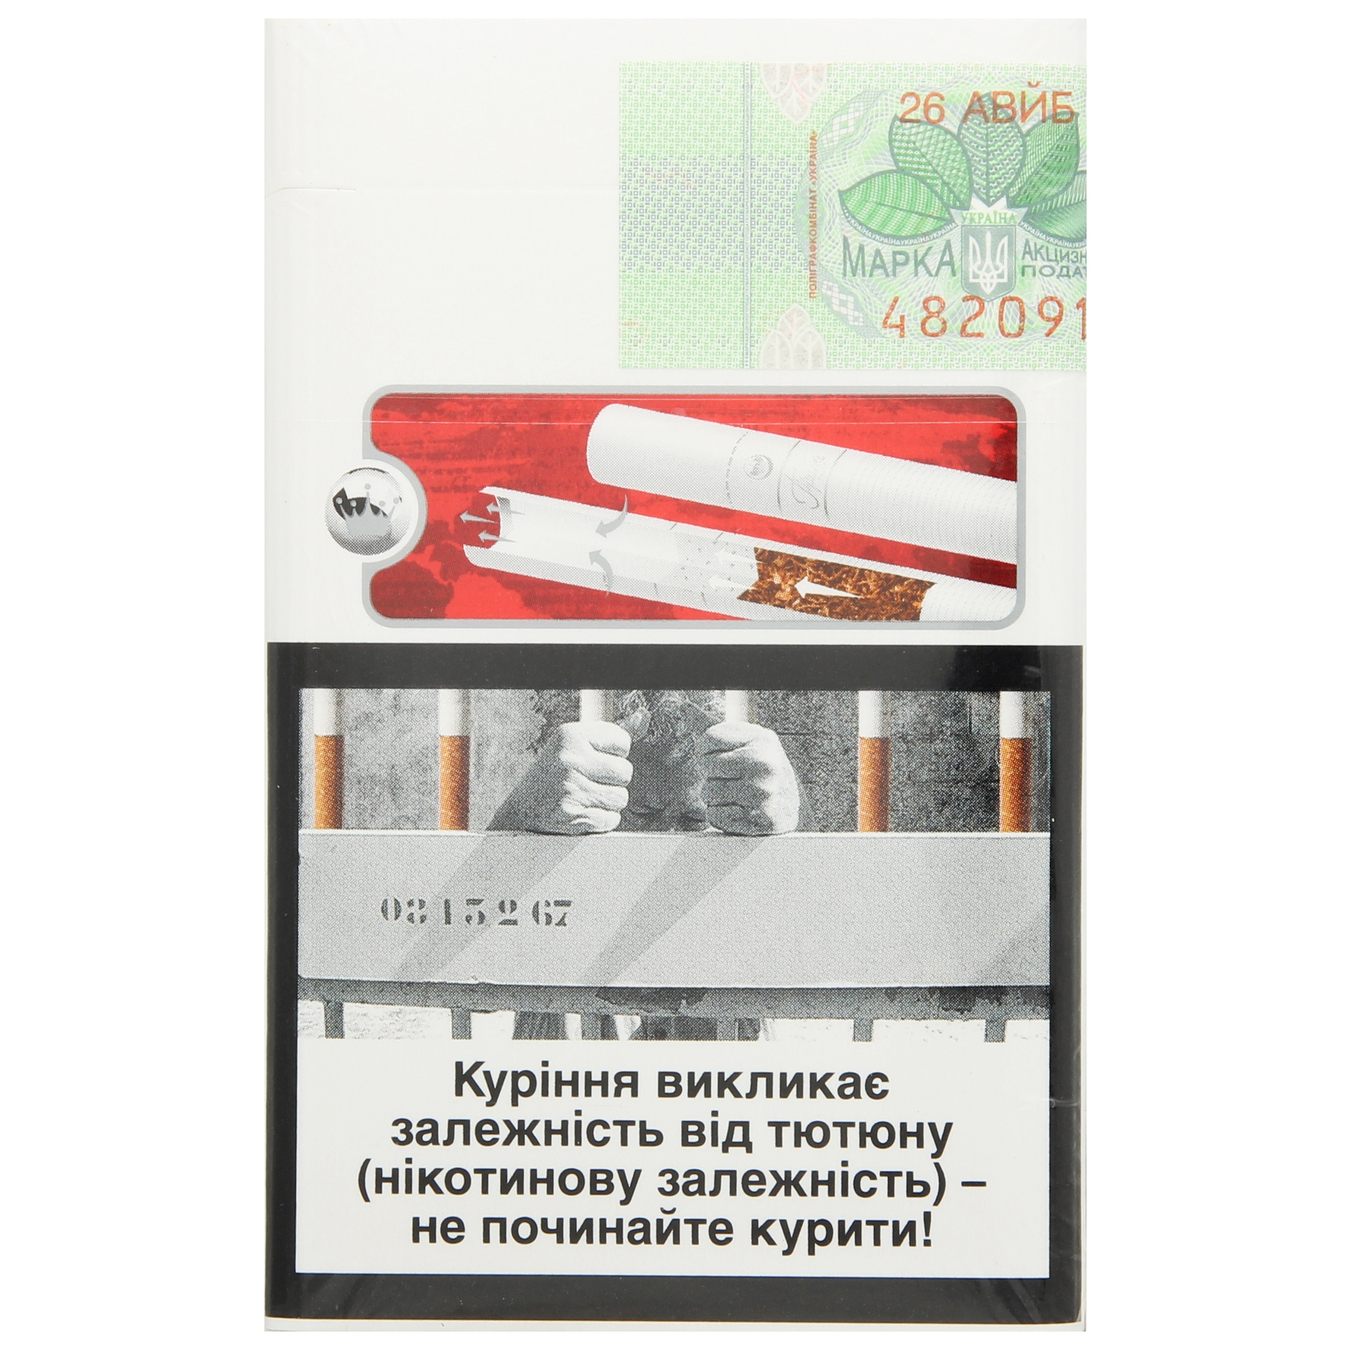 Prima Lux Cigarettes 20 pcs (the price is indicated without excise tax) 2